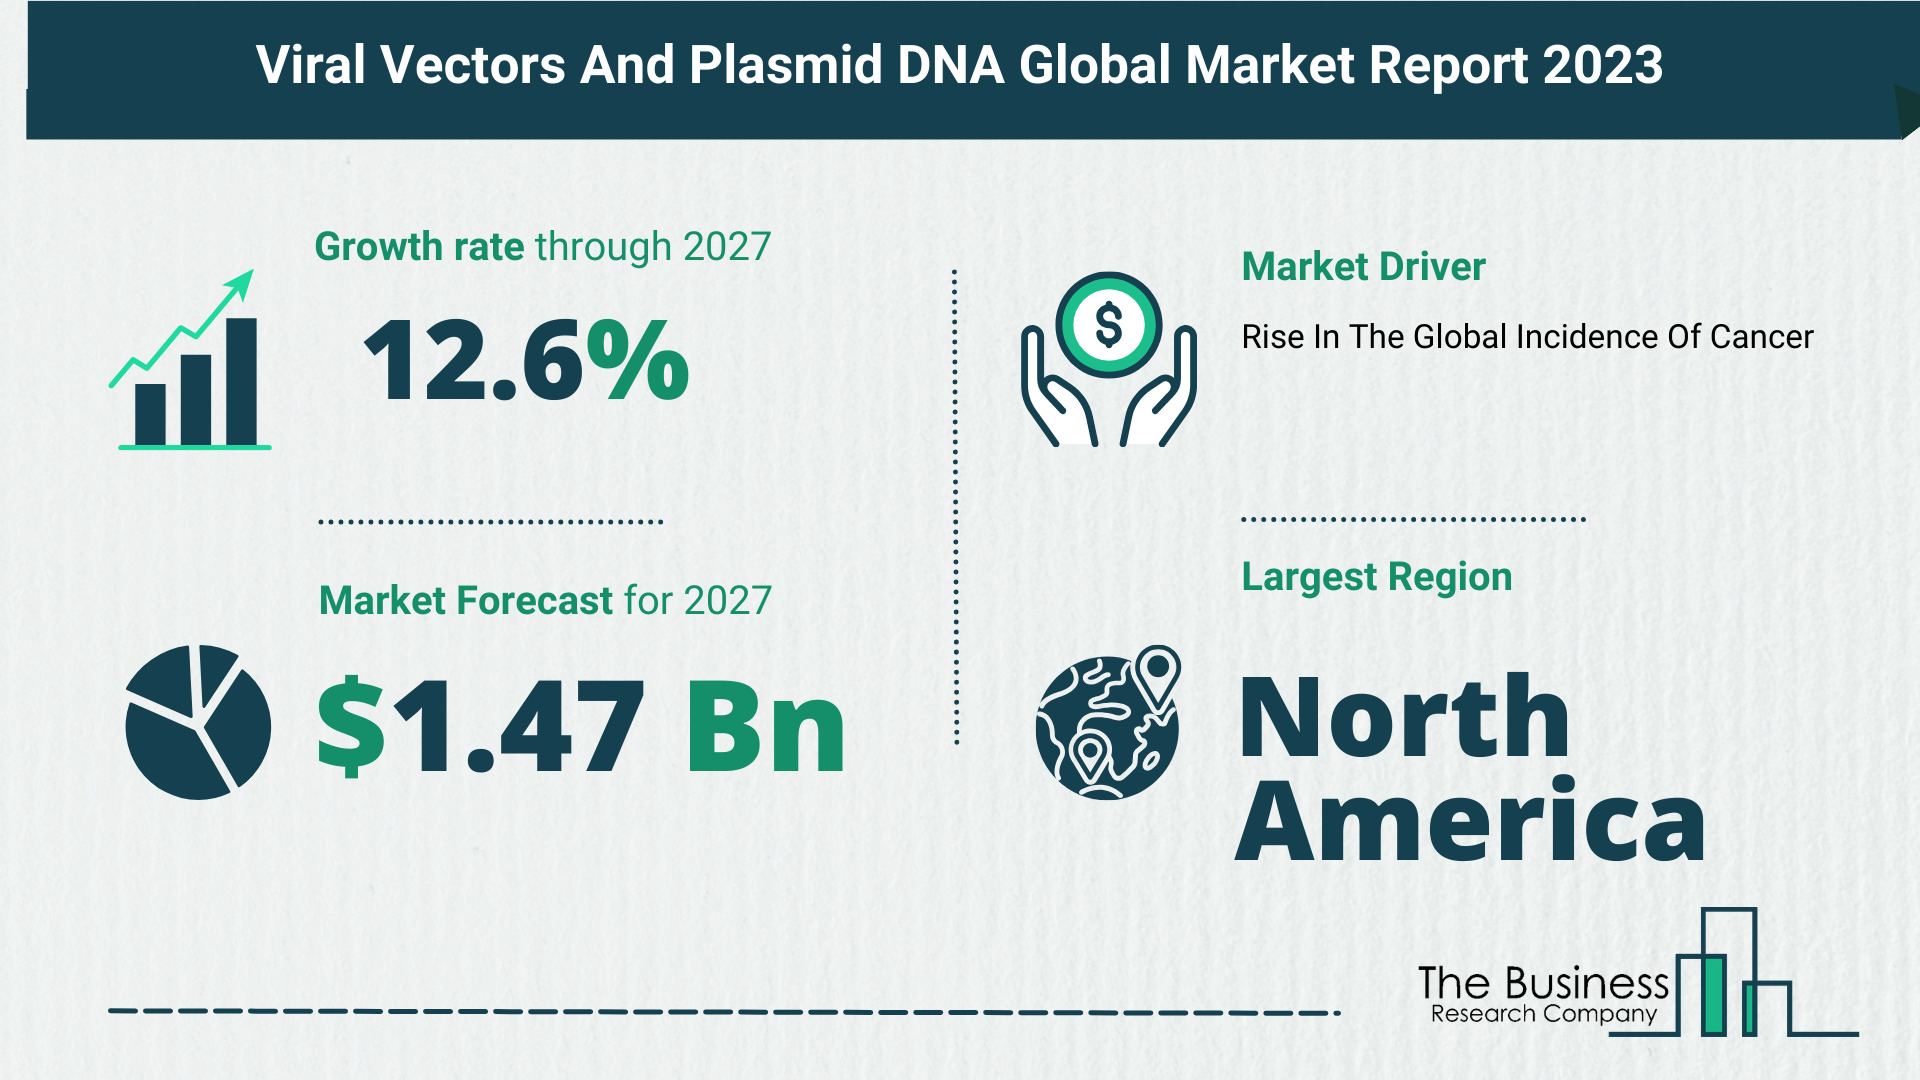 Understand How The Viral Vectors And Plasmid DNA Market Is Poised To Grow Through 2023-2032